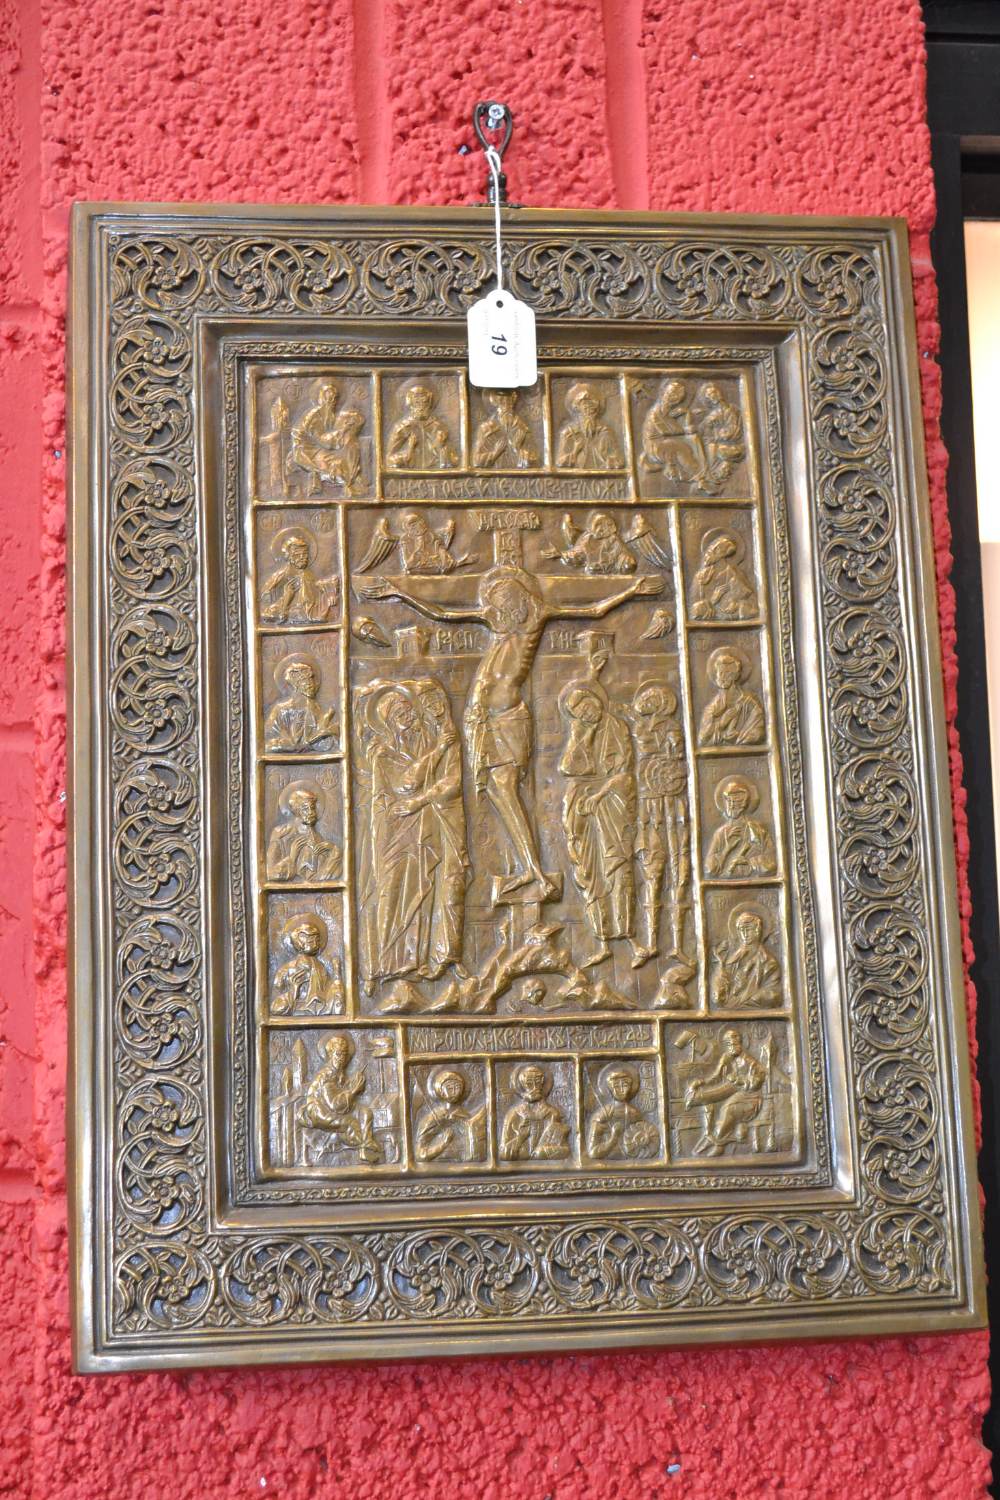 Stanyo Stanev, brass plaque, a Facing of the Krusnik Gospel